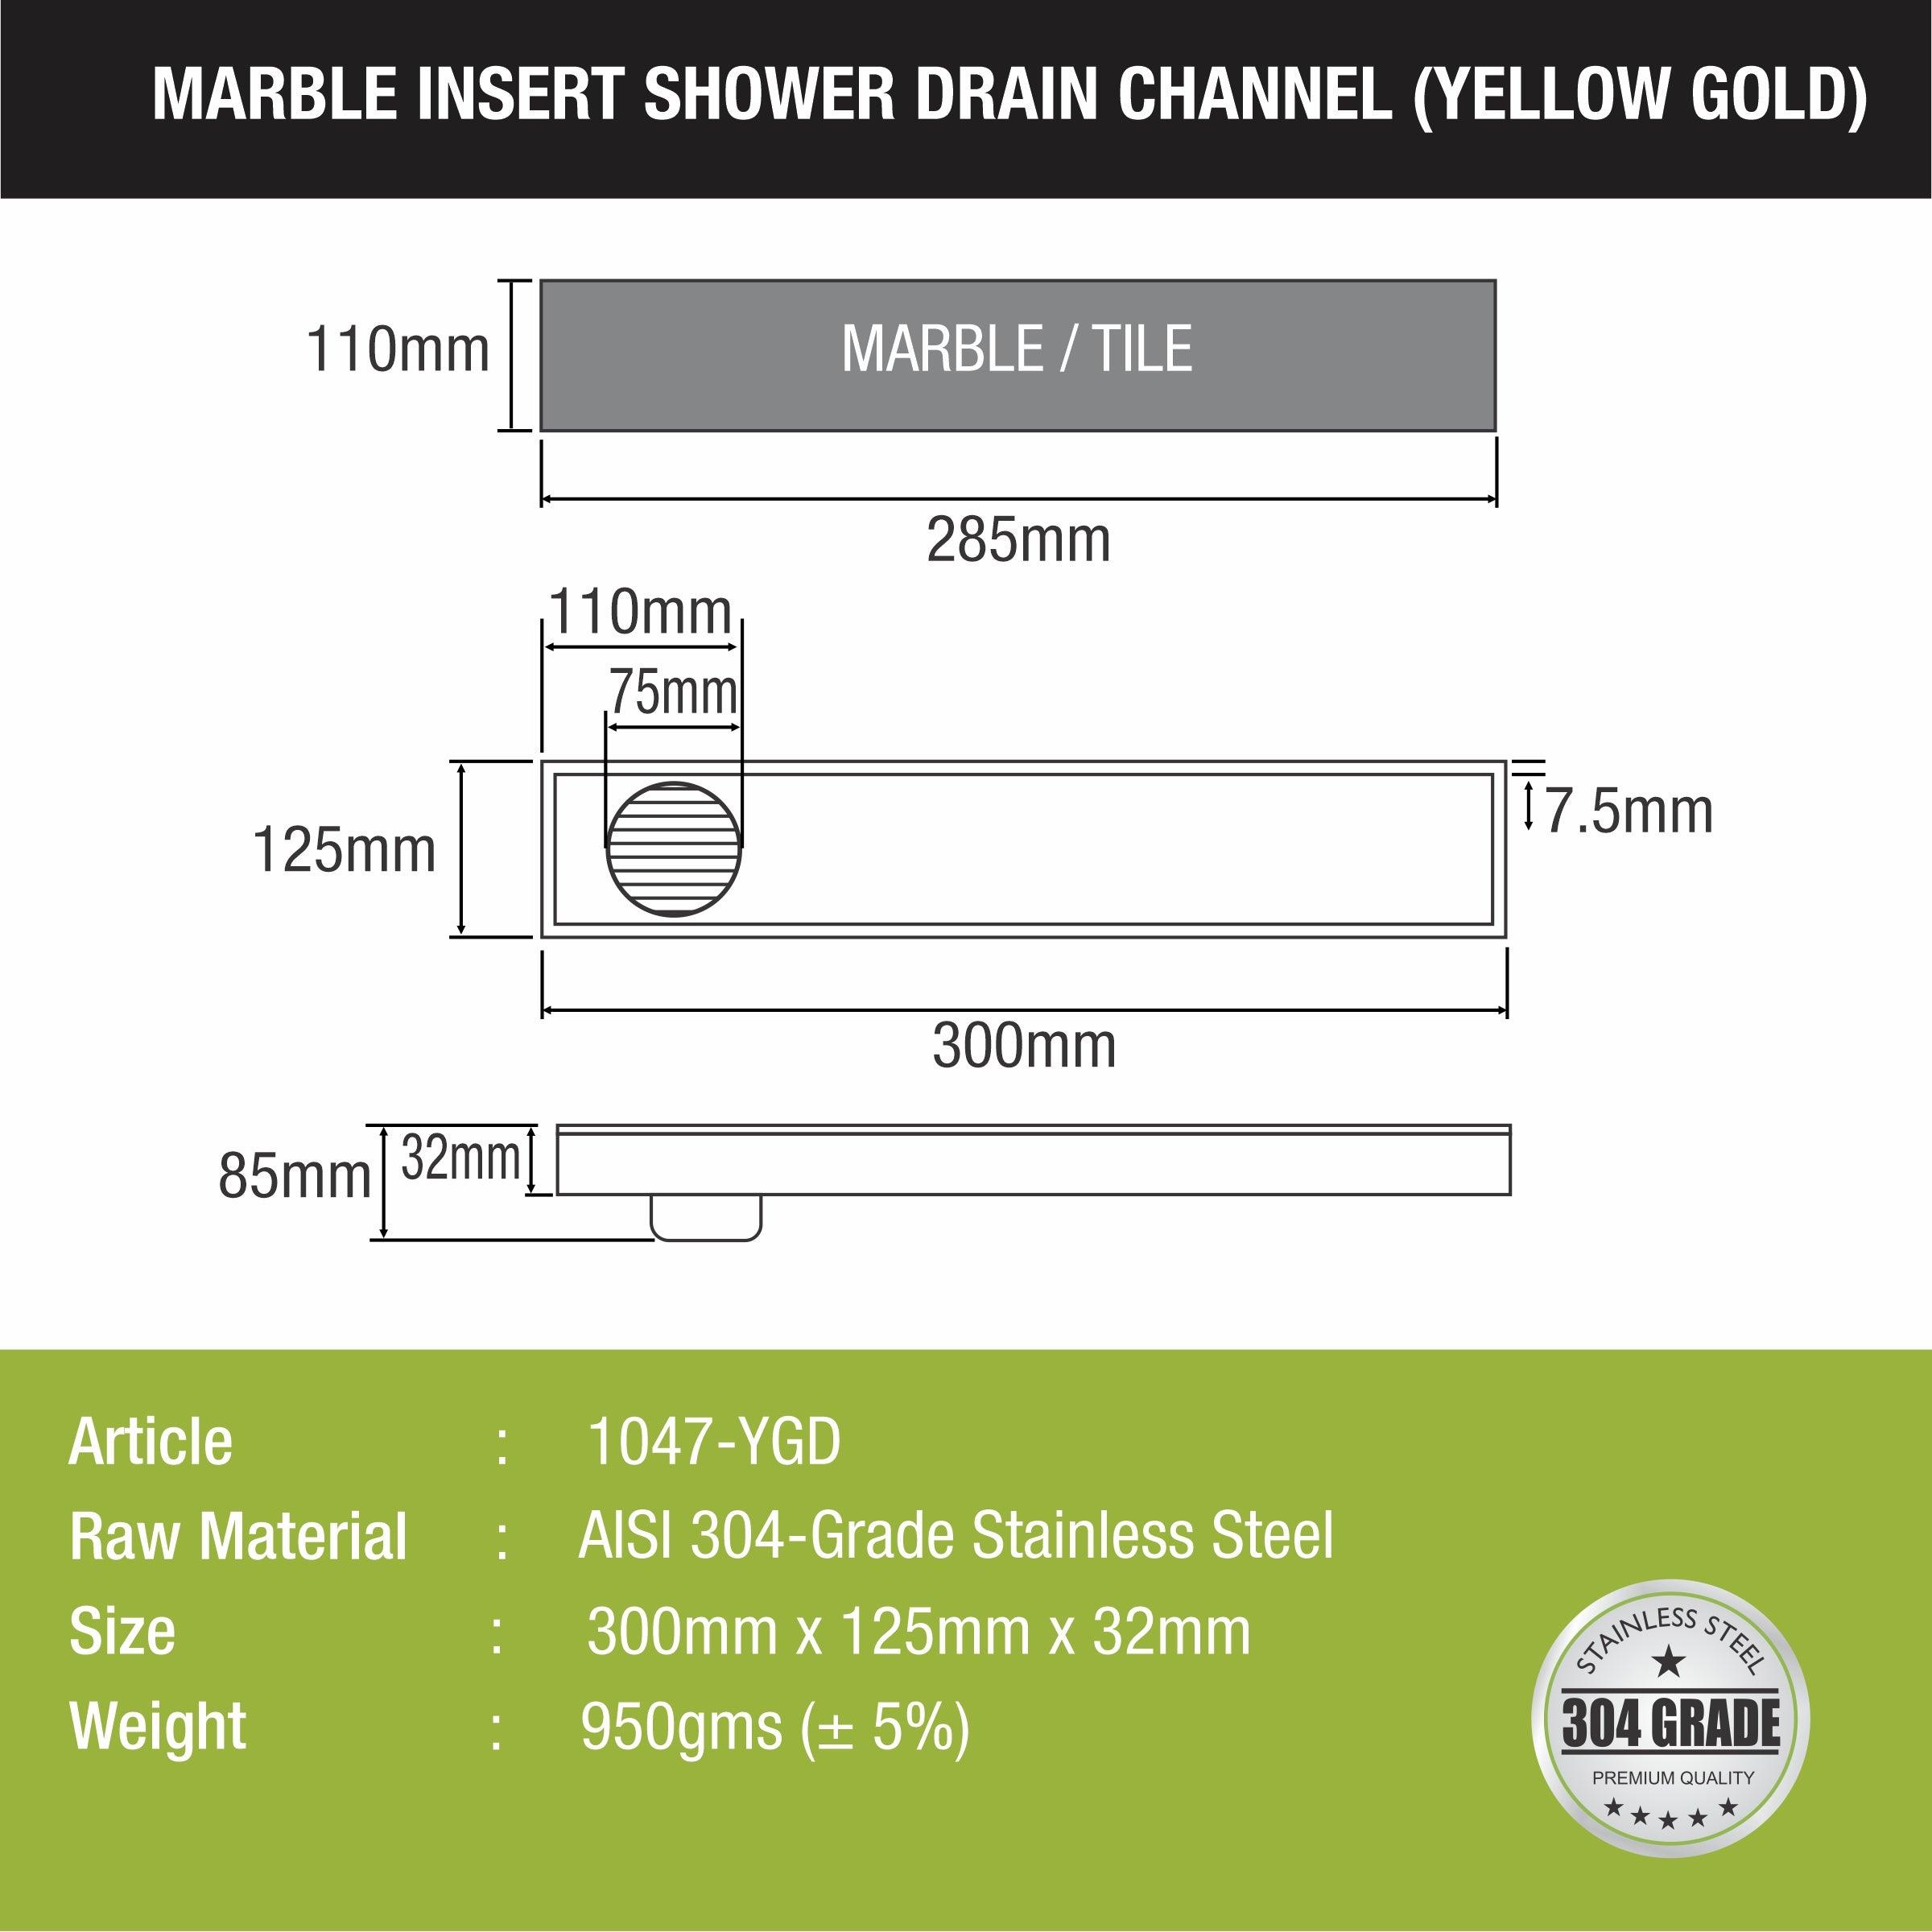 Marble Insert Shower Drain Channel - Yellow Gold (12 x 5 Inches) sizes and dimensions